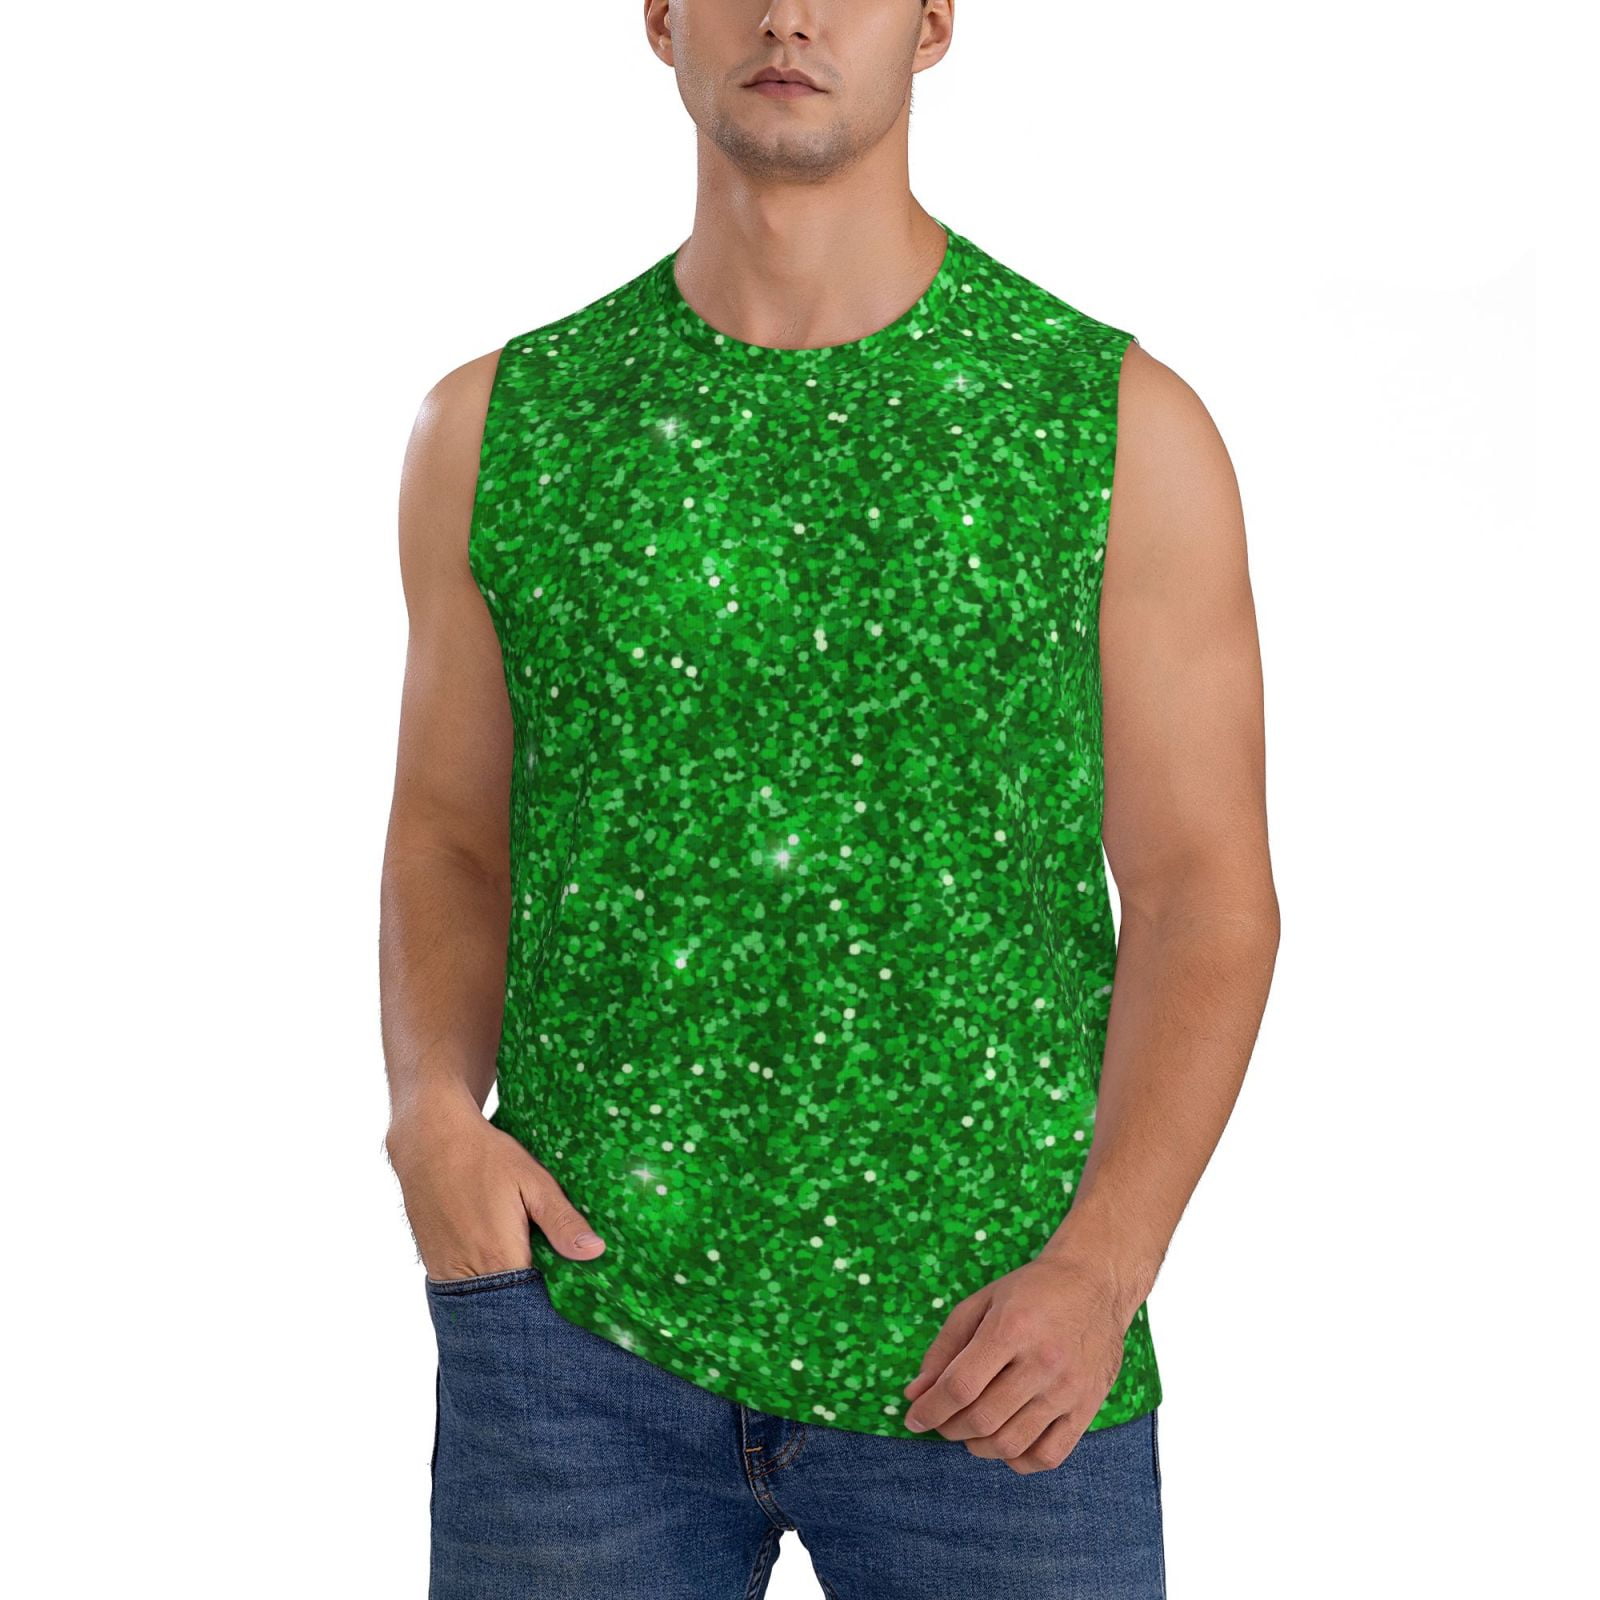 Adobk Green Glitter Men'S Tank Top Muscle Workout Gym Shirts Casual ...